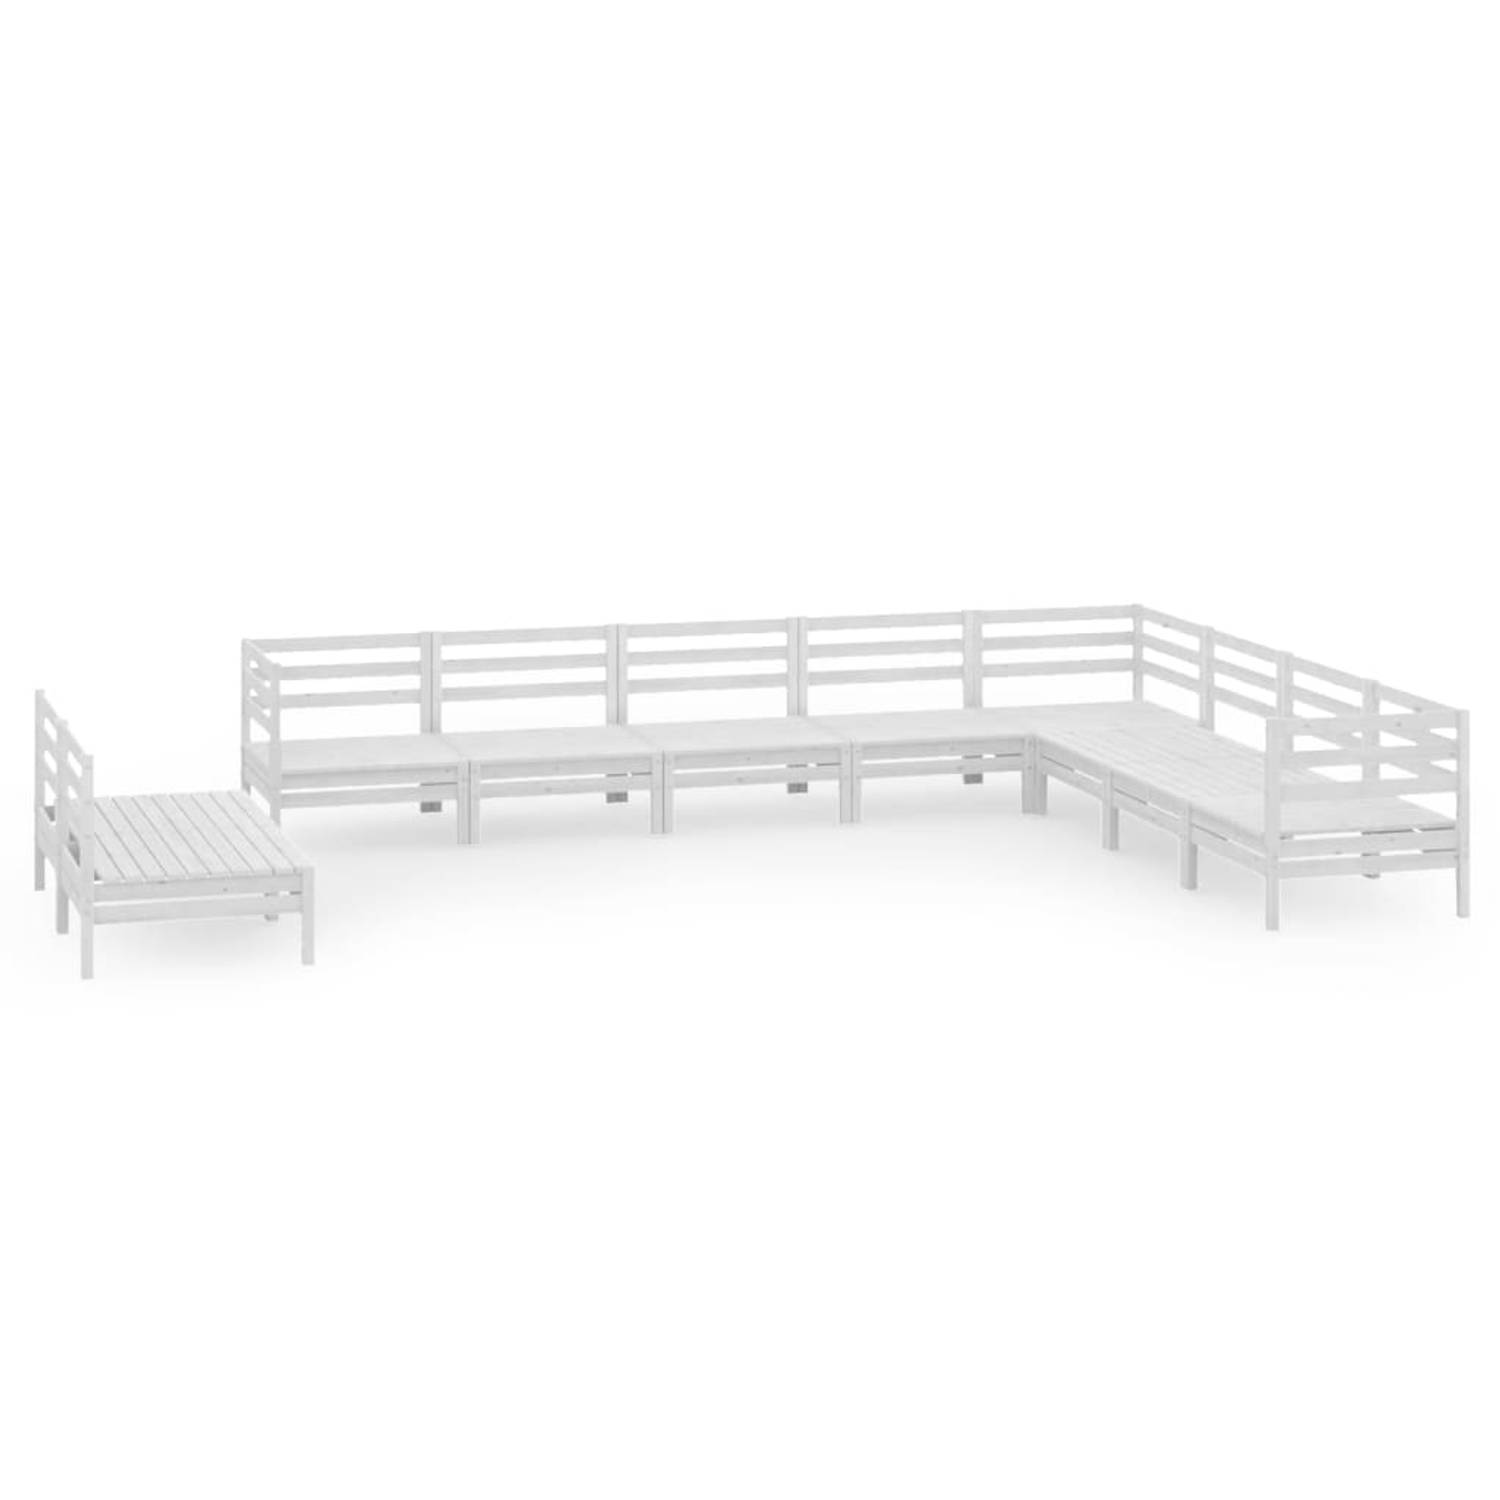 The Living Store Tuinmeubelset - Grenenhout - Wit - 63.5 x 63.5 x 62.5 cm - Modulair